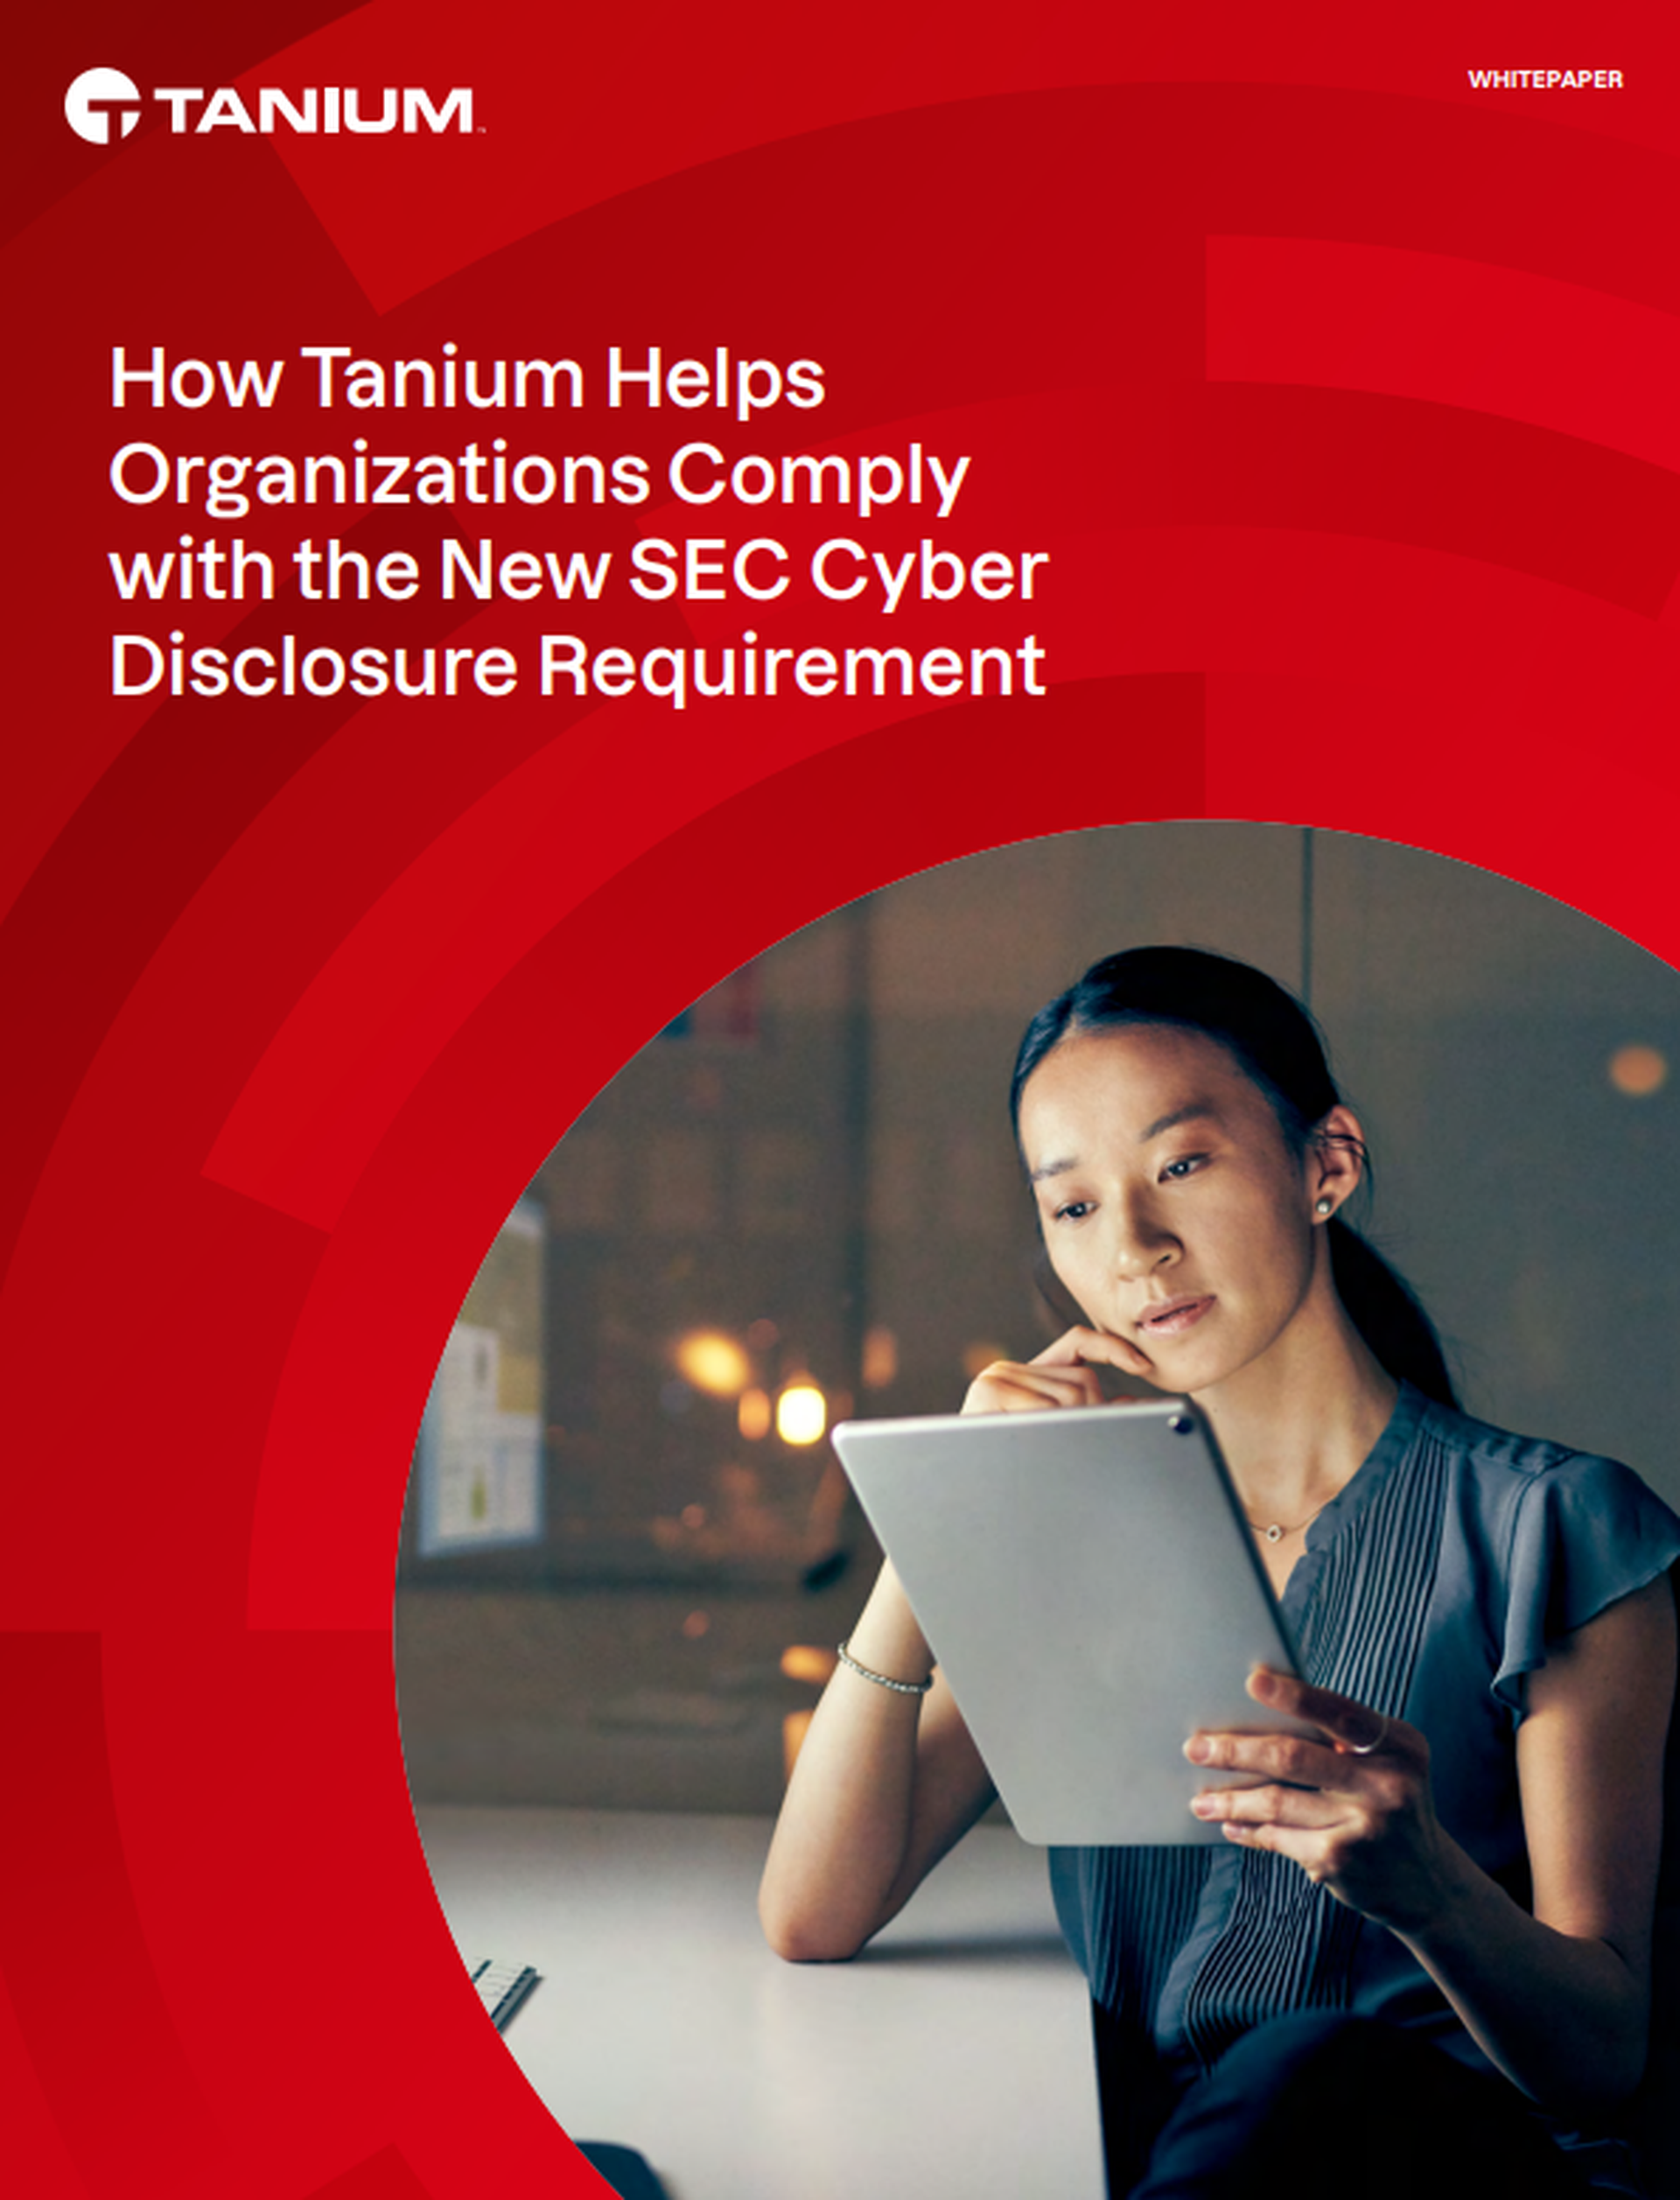 How Tanium Helps Organizations Comply with the New SEC Cyber Disclosure Requirement